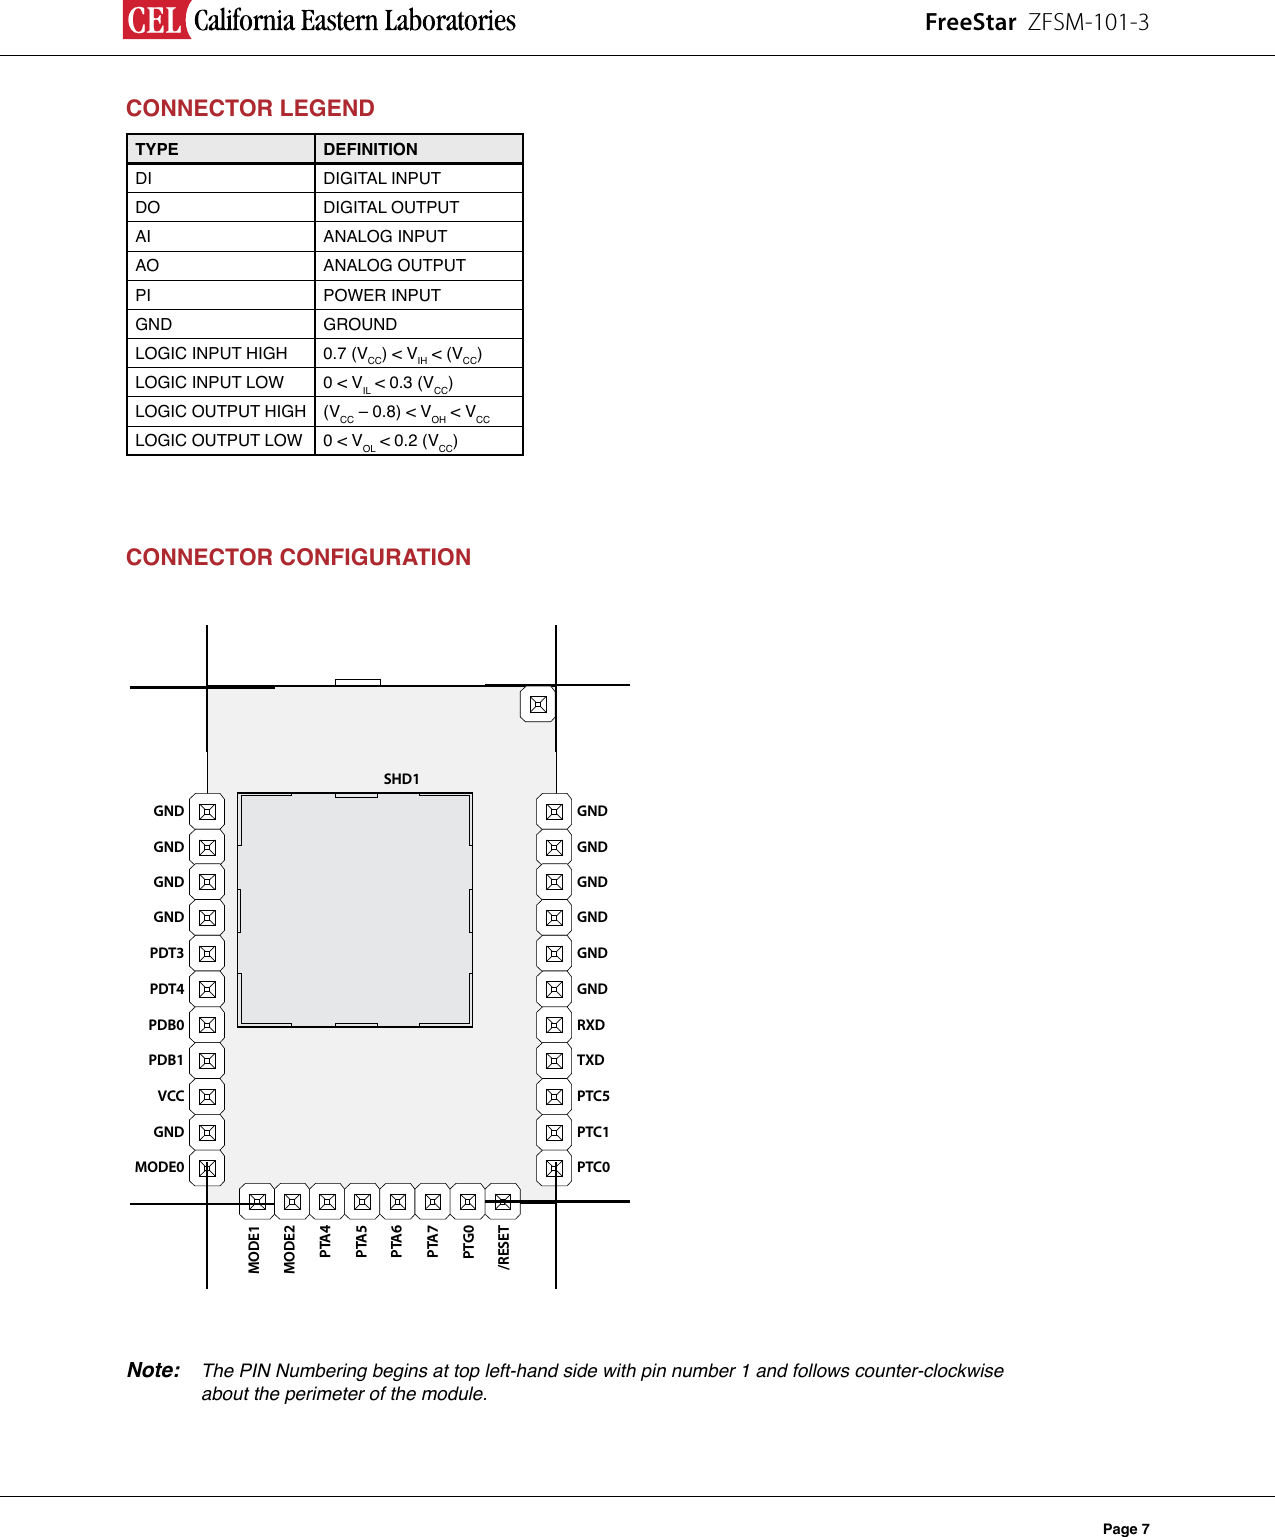 FreeStar  ZFSM-101-3Page 7CONNECTOR LEGEND   TYPE DEFINITIONDI DIGITAL INPUTDO DIGITAL OUTPUTAI ANALOG INPUTAO ANALOG OUTPUTPI  POWER INPUTGND GROUNDLOGIC INPUT HIGH 0.7 (VCC) &lt; VIH &lt; (VCC)LOGIC INPUT LOW 0 &lt; VIL &lt; 0.3 (VCC)LOGIC OUTPUT HIGH (VCC – 0.8) &lt; VOH &lt; VCCLOGIC OUTPUT LOW 0 &lt; VOL &lt; 0.2 (VCC)CONNECTOR CONFIGURATIONGNDSHD1GNDGNDGNDGNDGNDRXDTXDPTC5PTC1PTC0GNDGNDGNDGNDPDT3PDT4PDB0PDB1VCCGNDMODE0MODE1MODE2PTA4PTA5PTA6PTA7PTG0/RESET Note: The PIN Numbering begins at top left-hand side with pin number 1 and follows counter-clockwise    about the perimeter of the module.